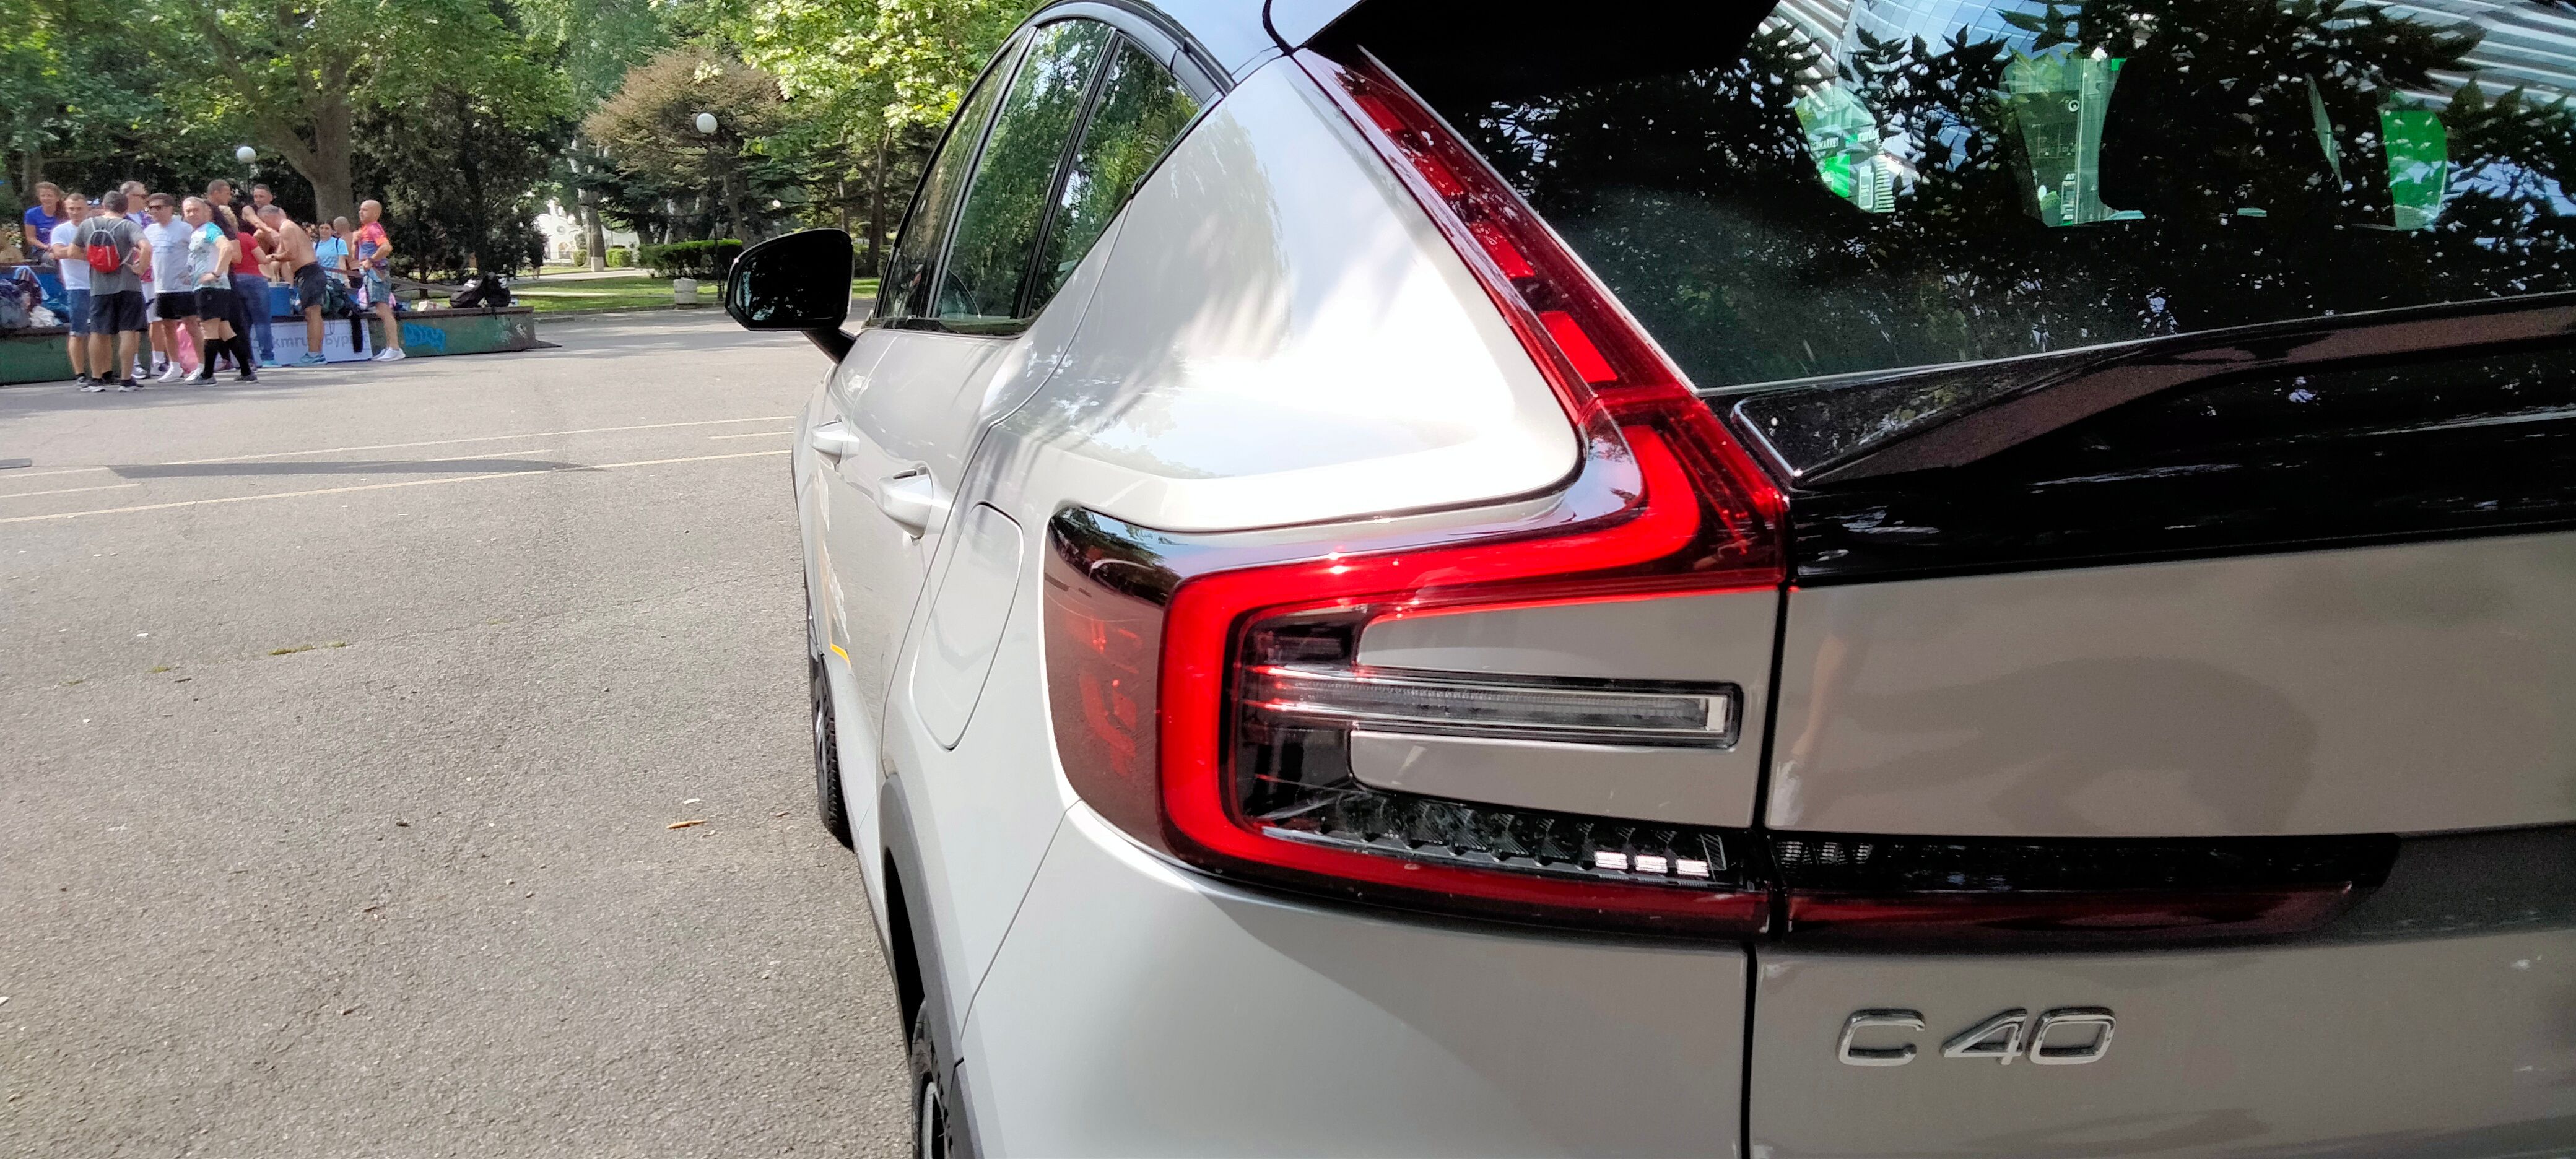 2023 2023 Volvo C40 Recharge Review: The Sportier Electric Alternative to the XC40